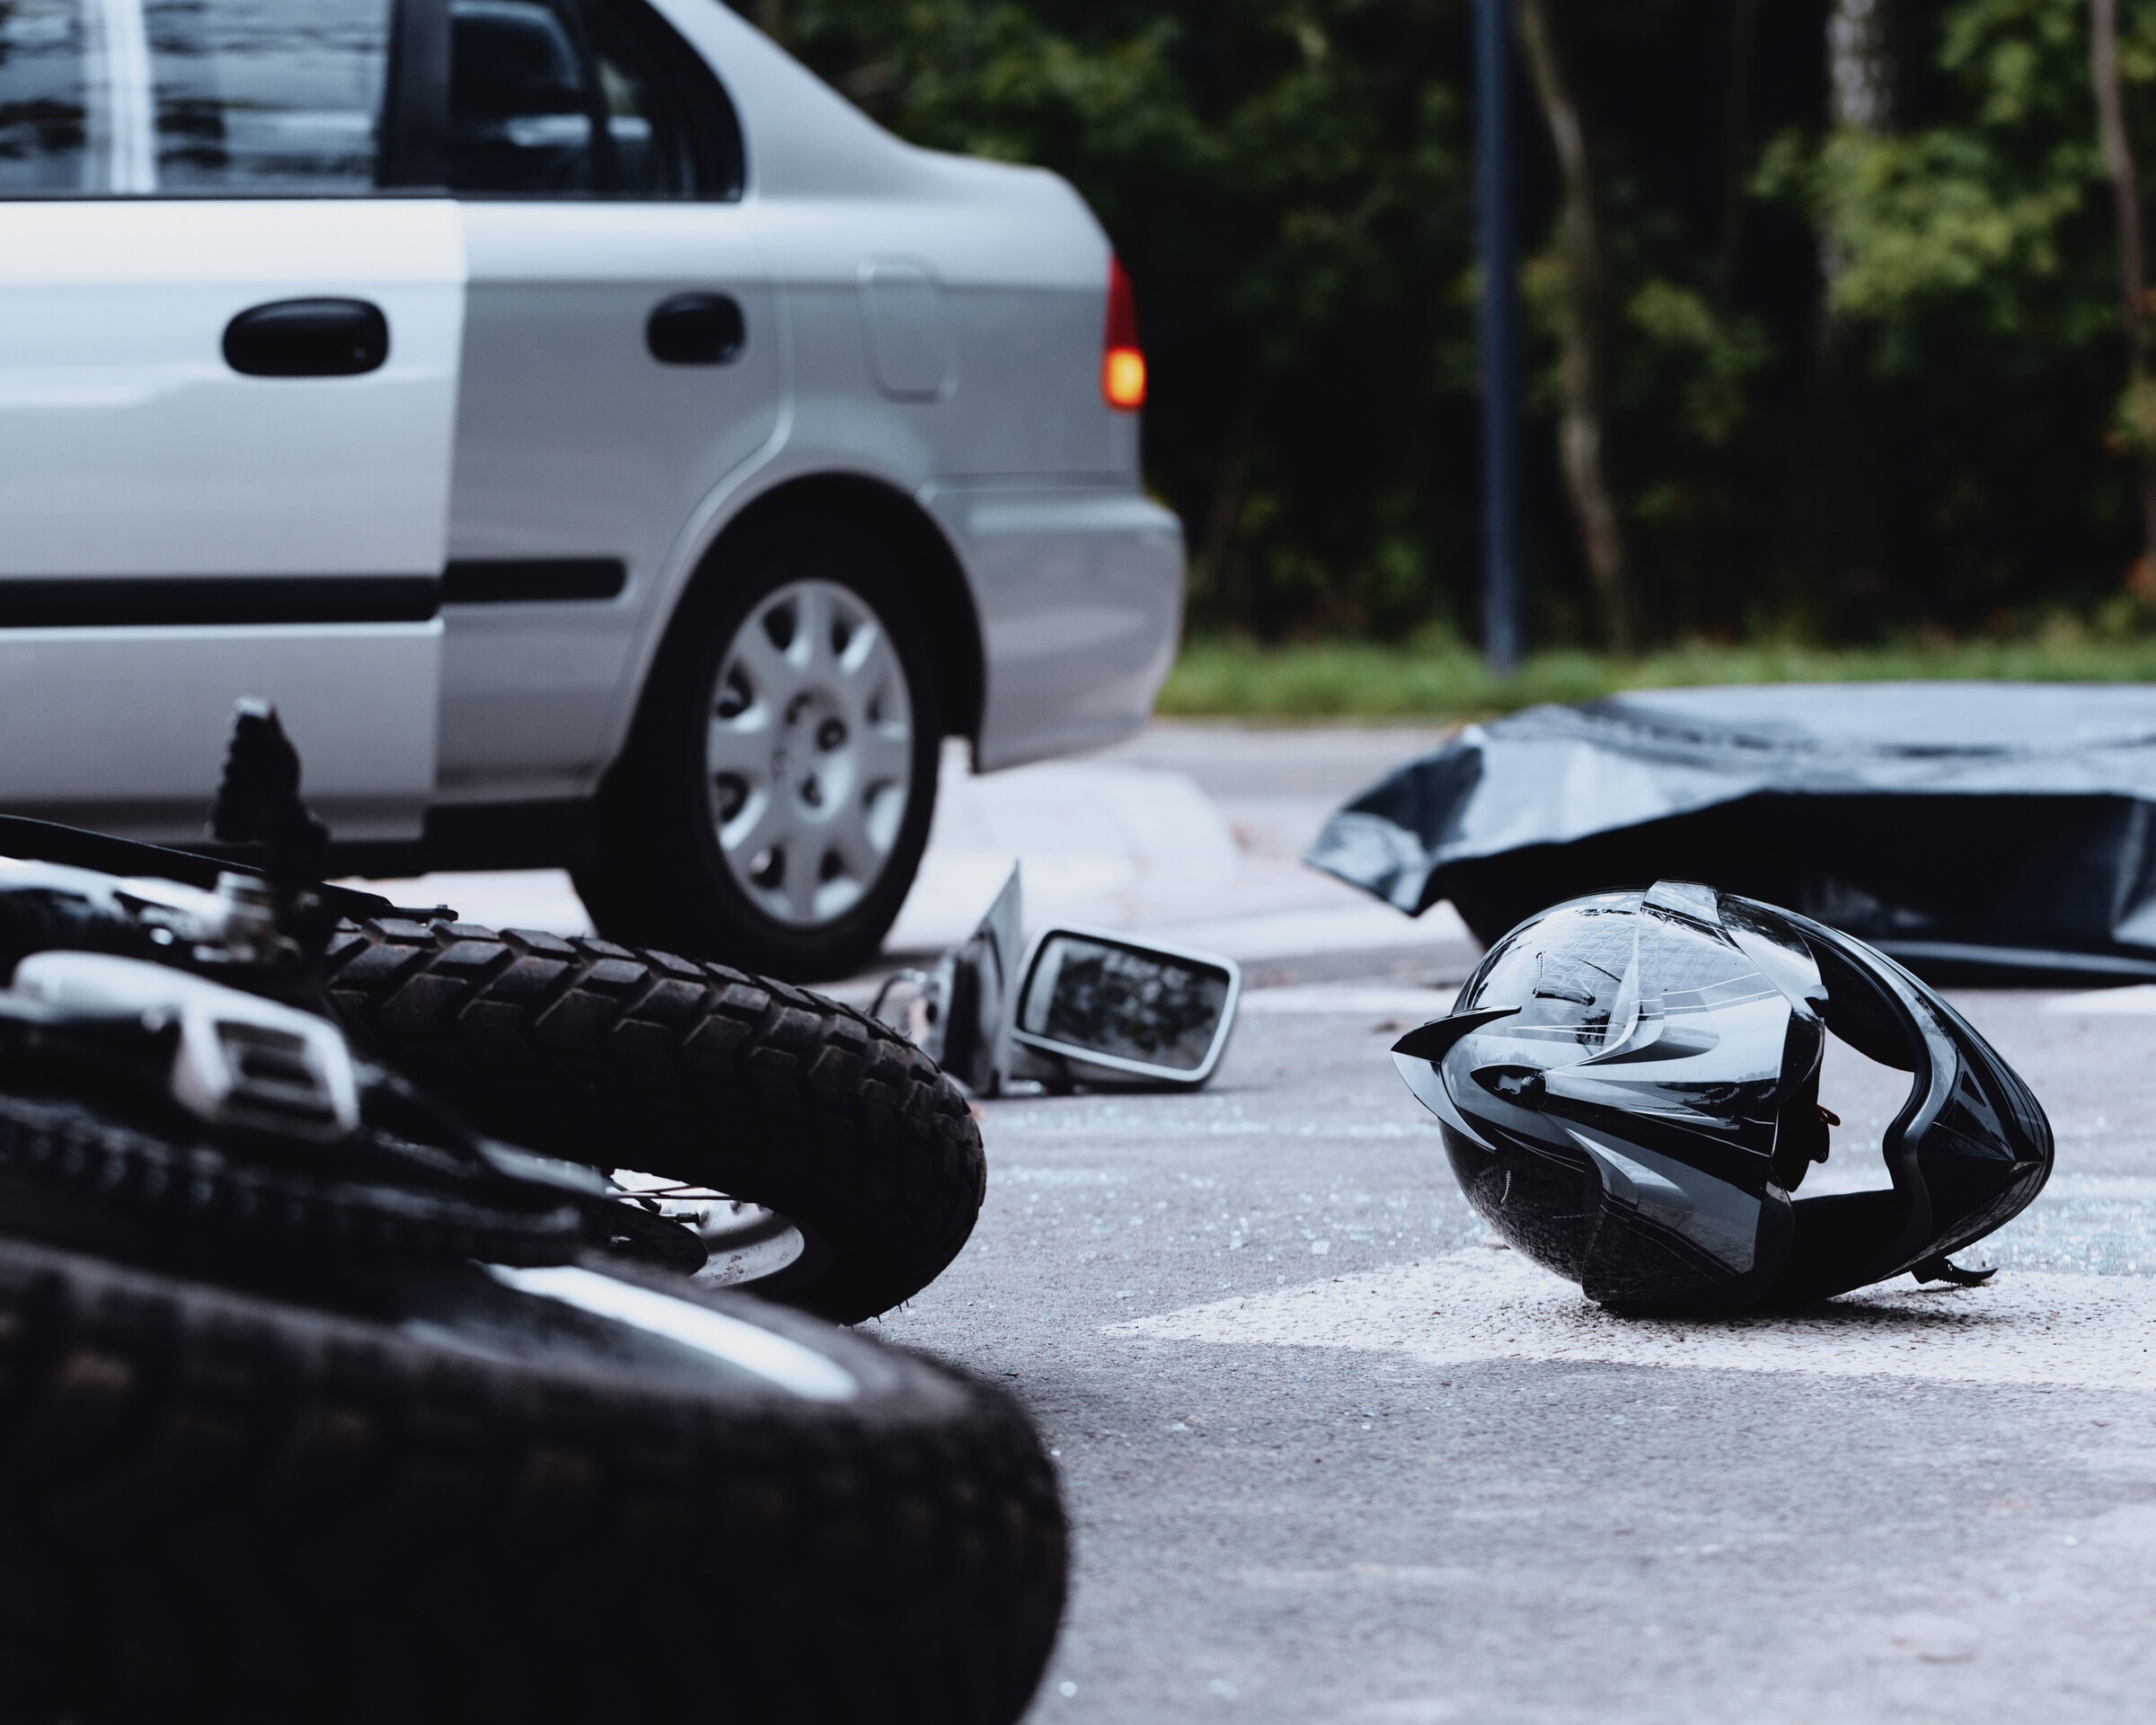 Reliable lawyers who are dedicated to providing support and guidance to those affected by car and motor vehicle accidents in Athens